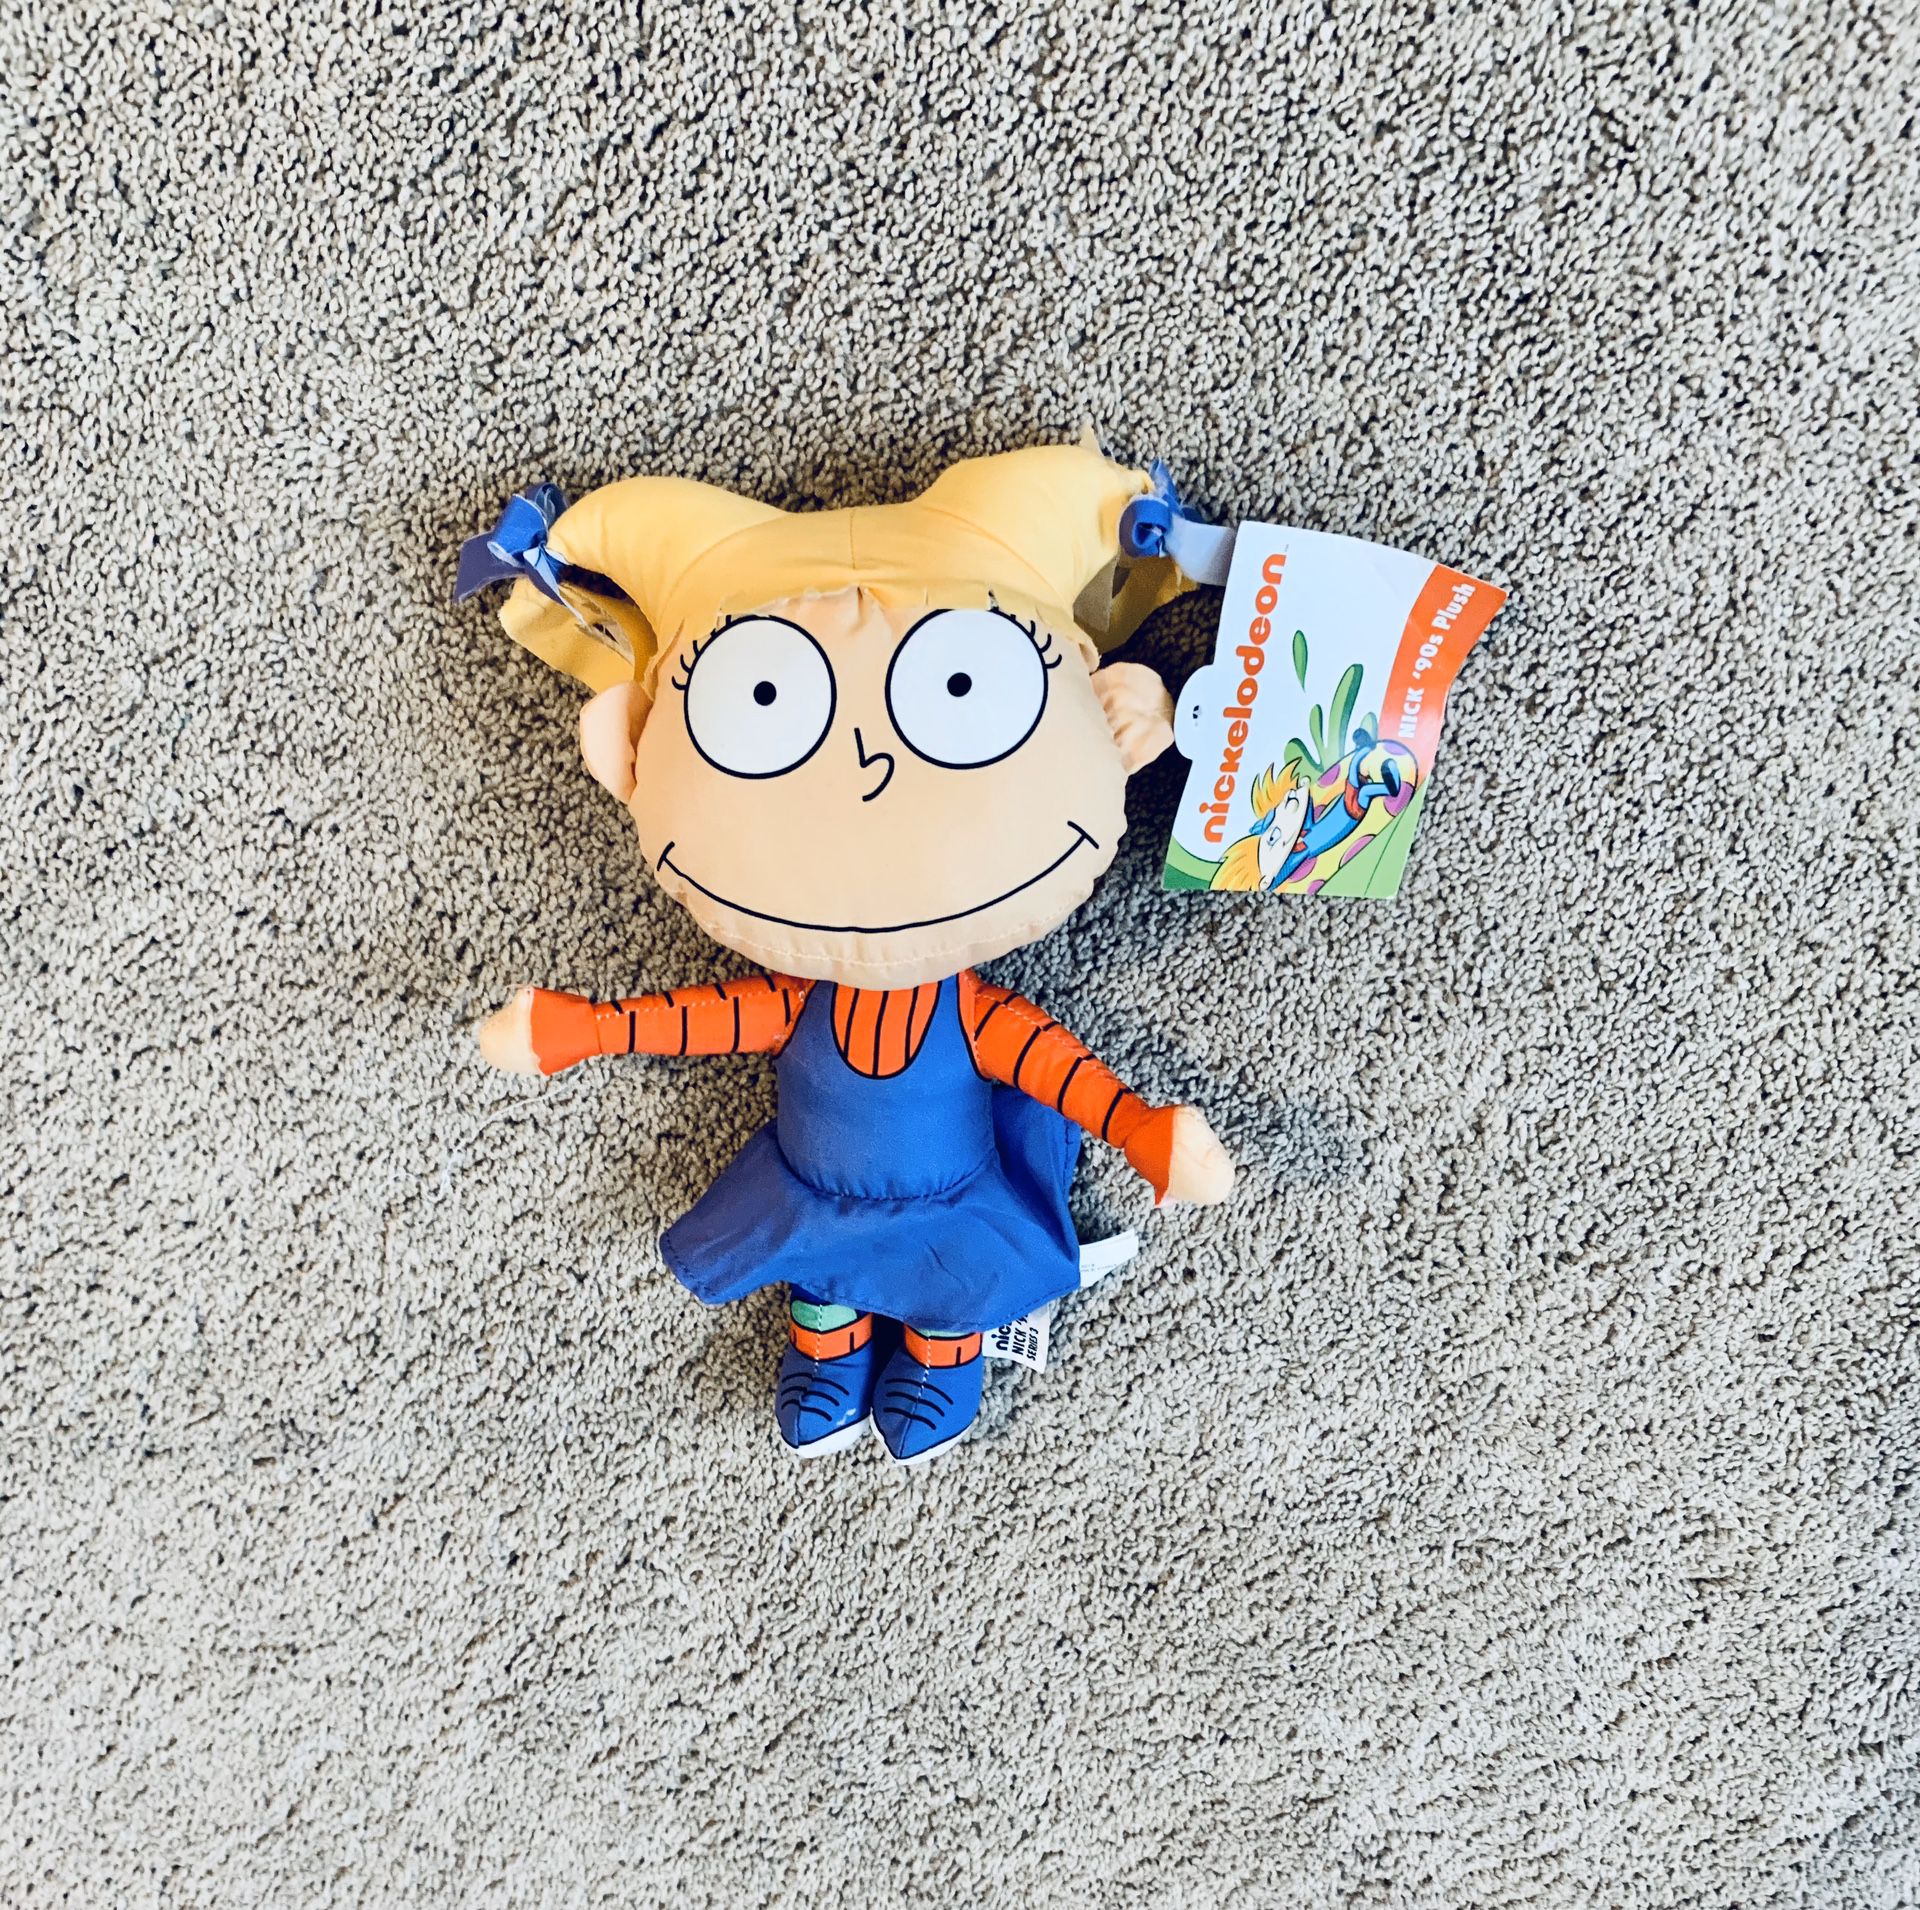 Rugrats Angelica Plush Toy